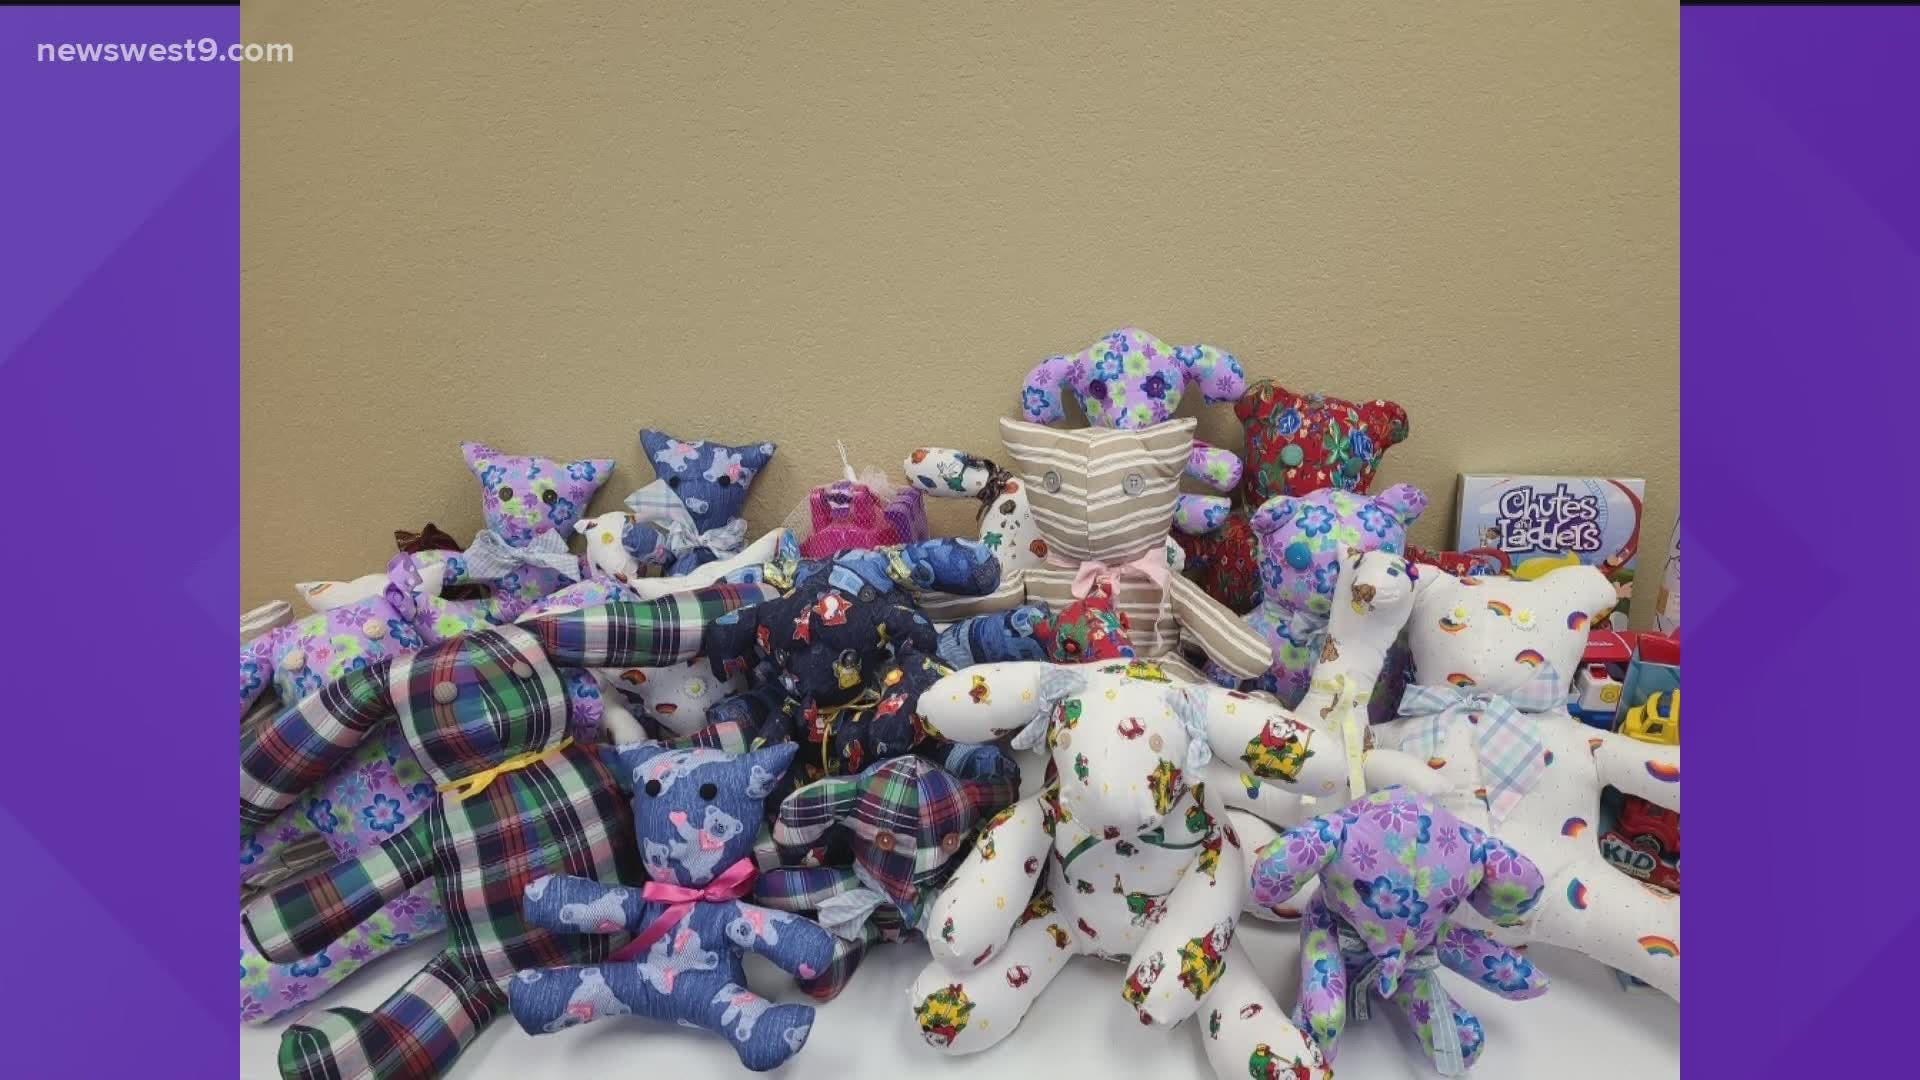 Thanks to the efforts of staff and volunteers, MCT was able to donate 50 stuffed animals.